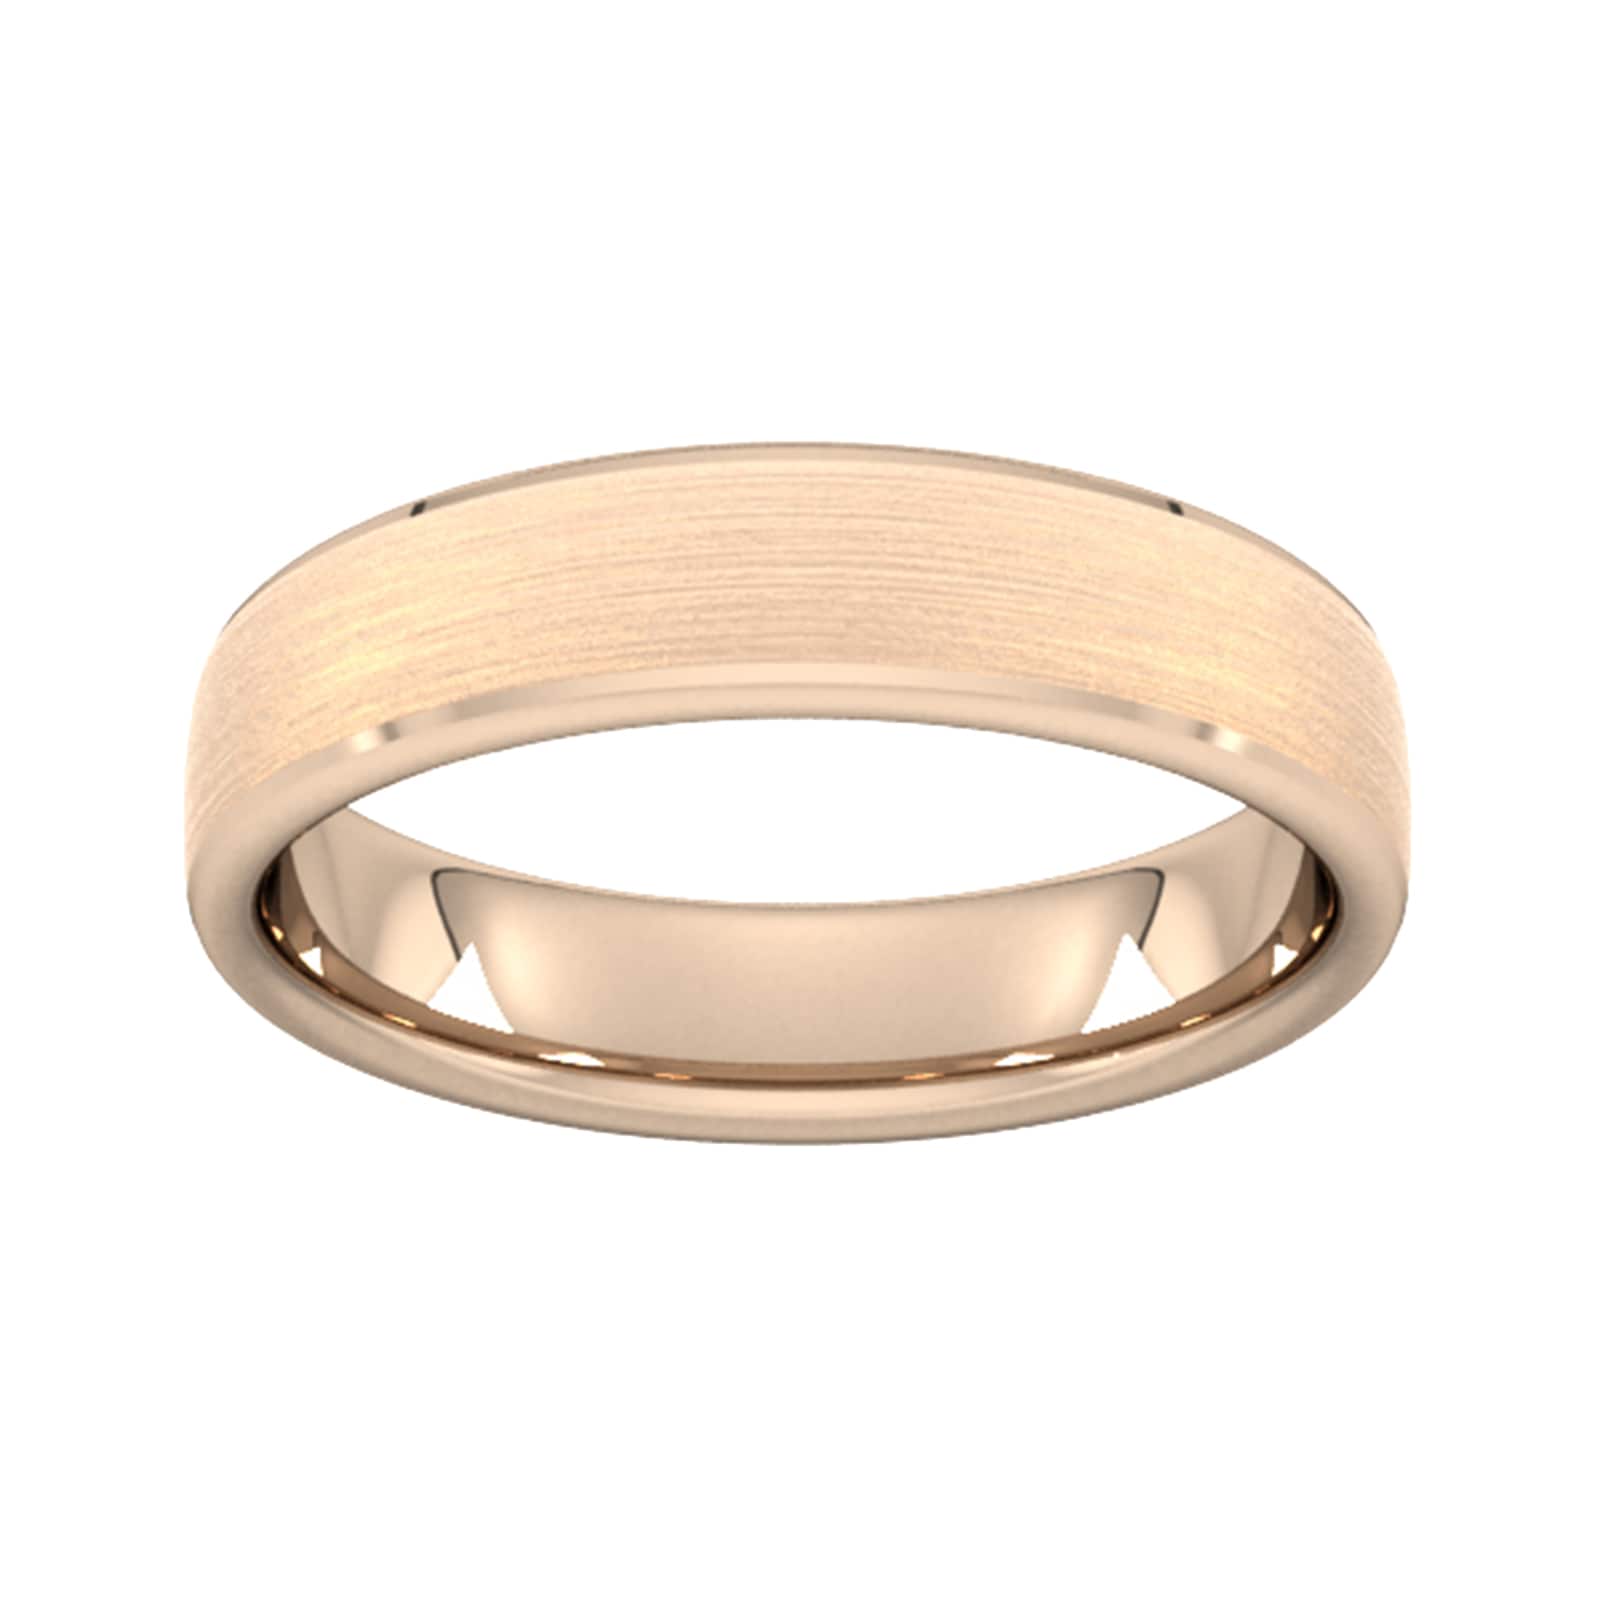 5mm Traditional Court Standard Polished Chamfered Edges With Matt Centre Wedding Ring In 9 Carat Rose Gold - Ring Size O